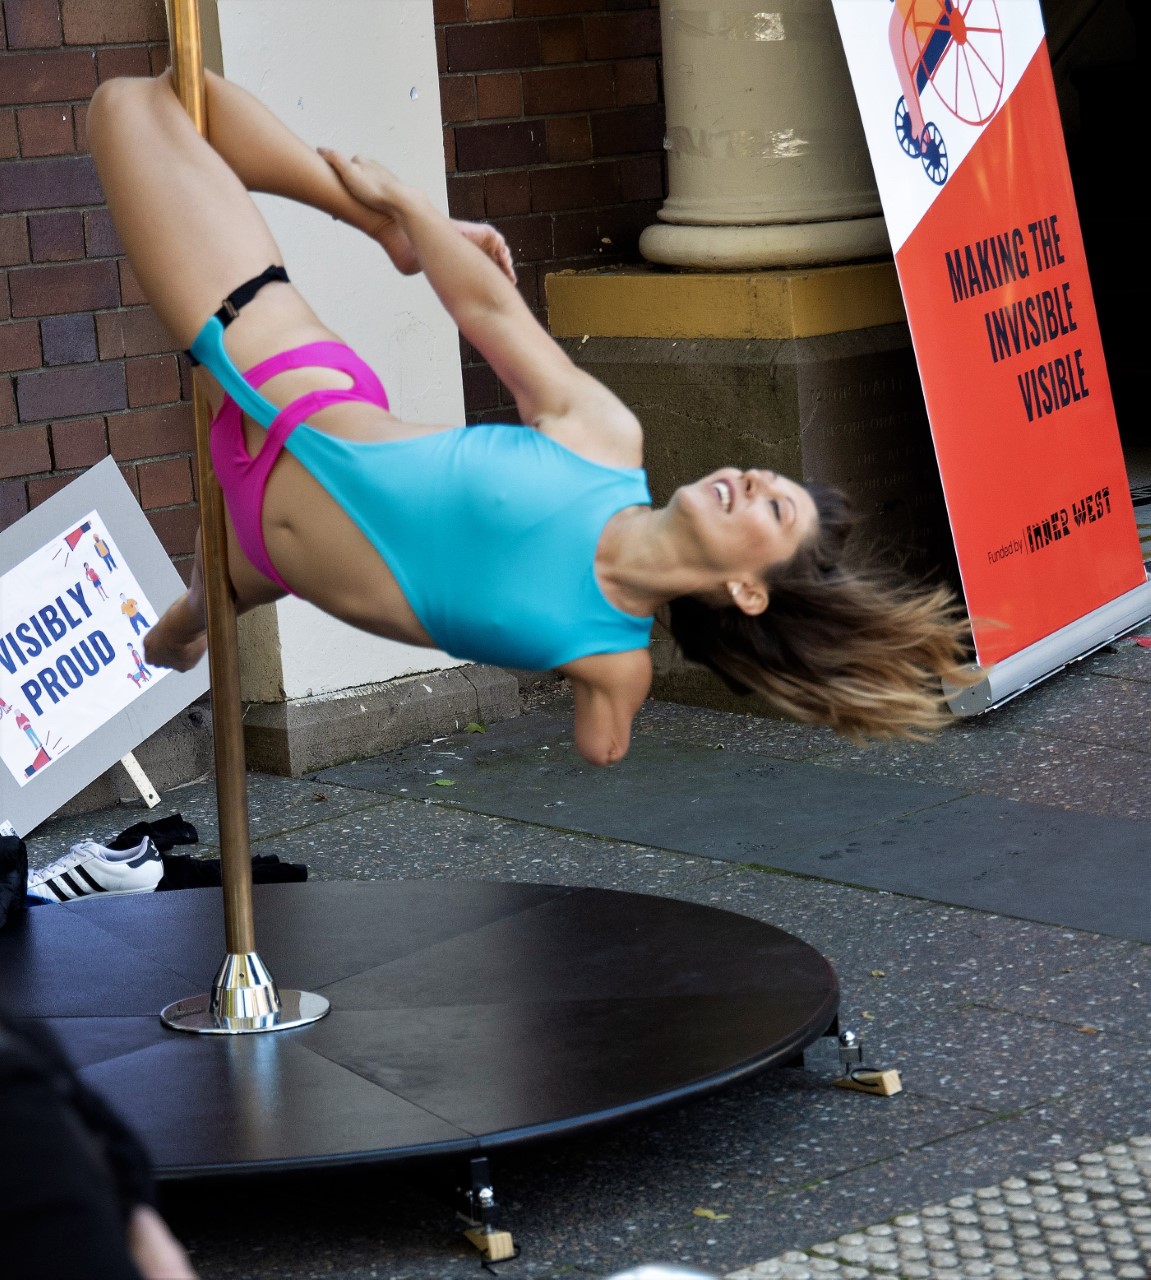 A photo of a disabled pole dancer, upside down, mid-routine on stage. She is an amputee with one arm, has long brown hair, and is wearing a blue a pink lycra body suit. Beside the stage is a pair of white and black Adidas shoes, a protest sign that reads ‘Visibly Proud’ and a red festival banner that reads ‘Making the Invisible Visible, Funded by Inner West’.